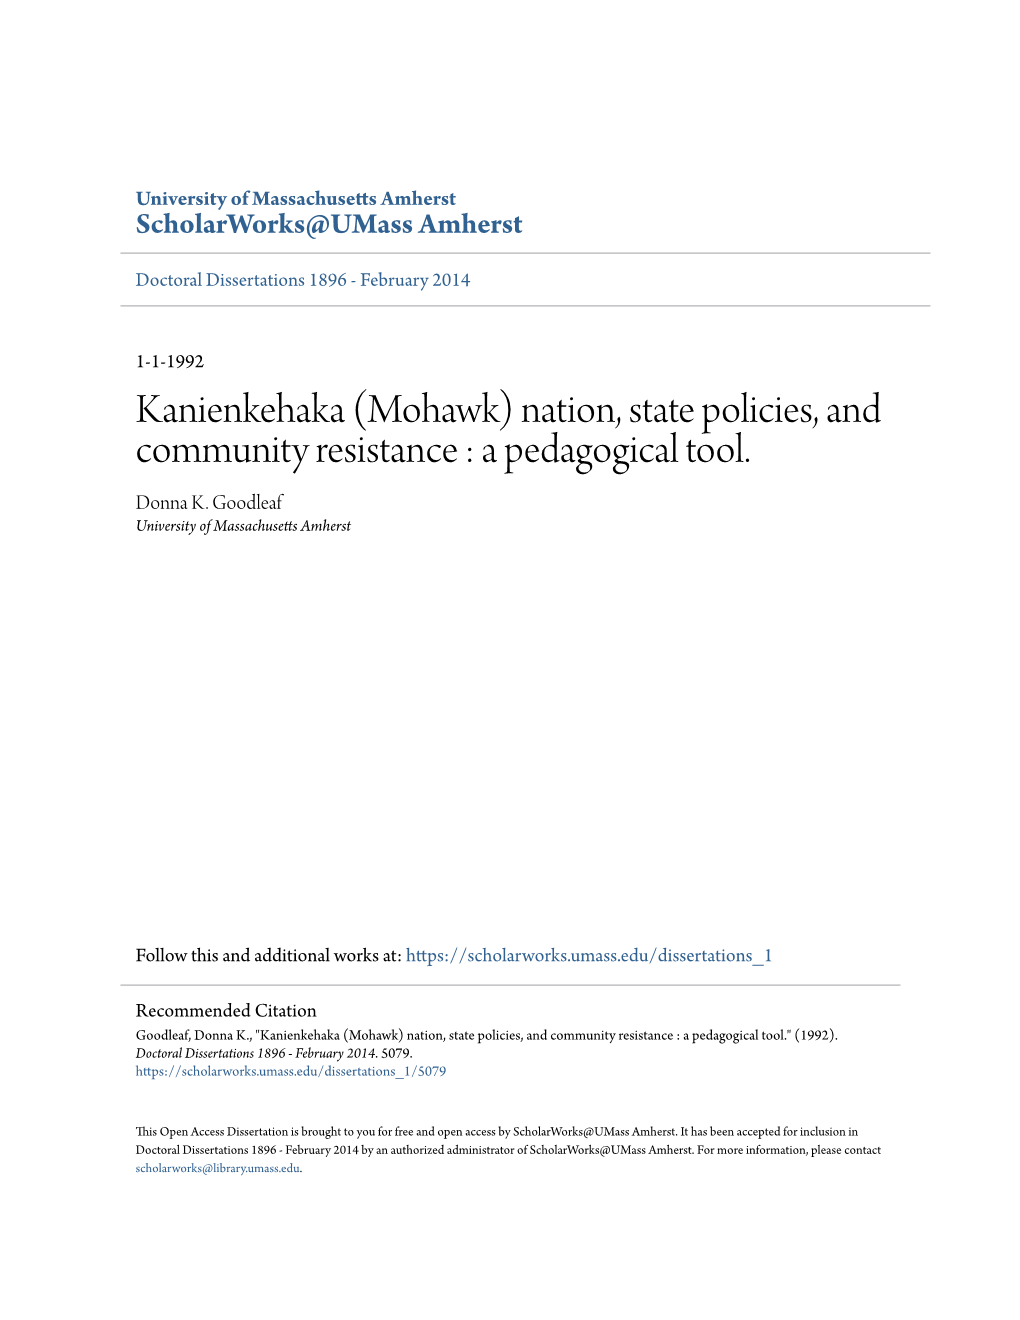 Kanienkehaka (Mohawk) Nation, State Policies, and Community Resistance : a Pedagogical Tool